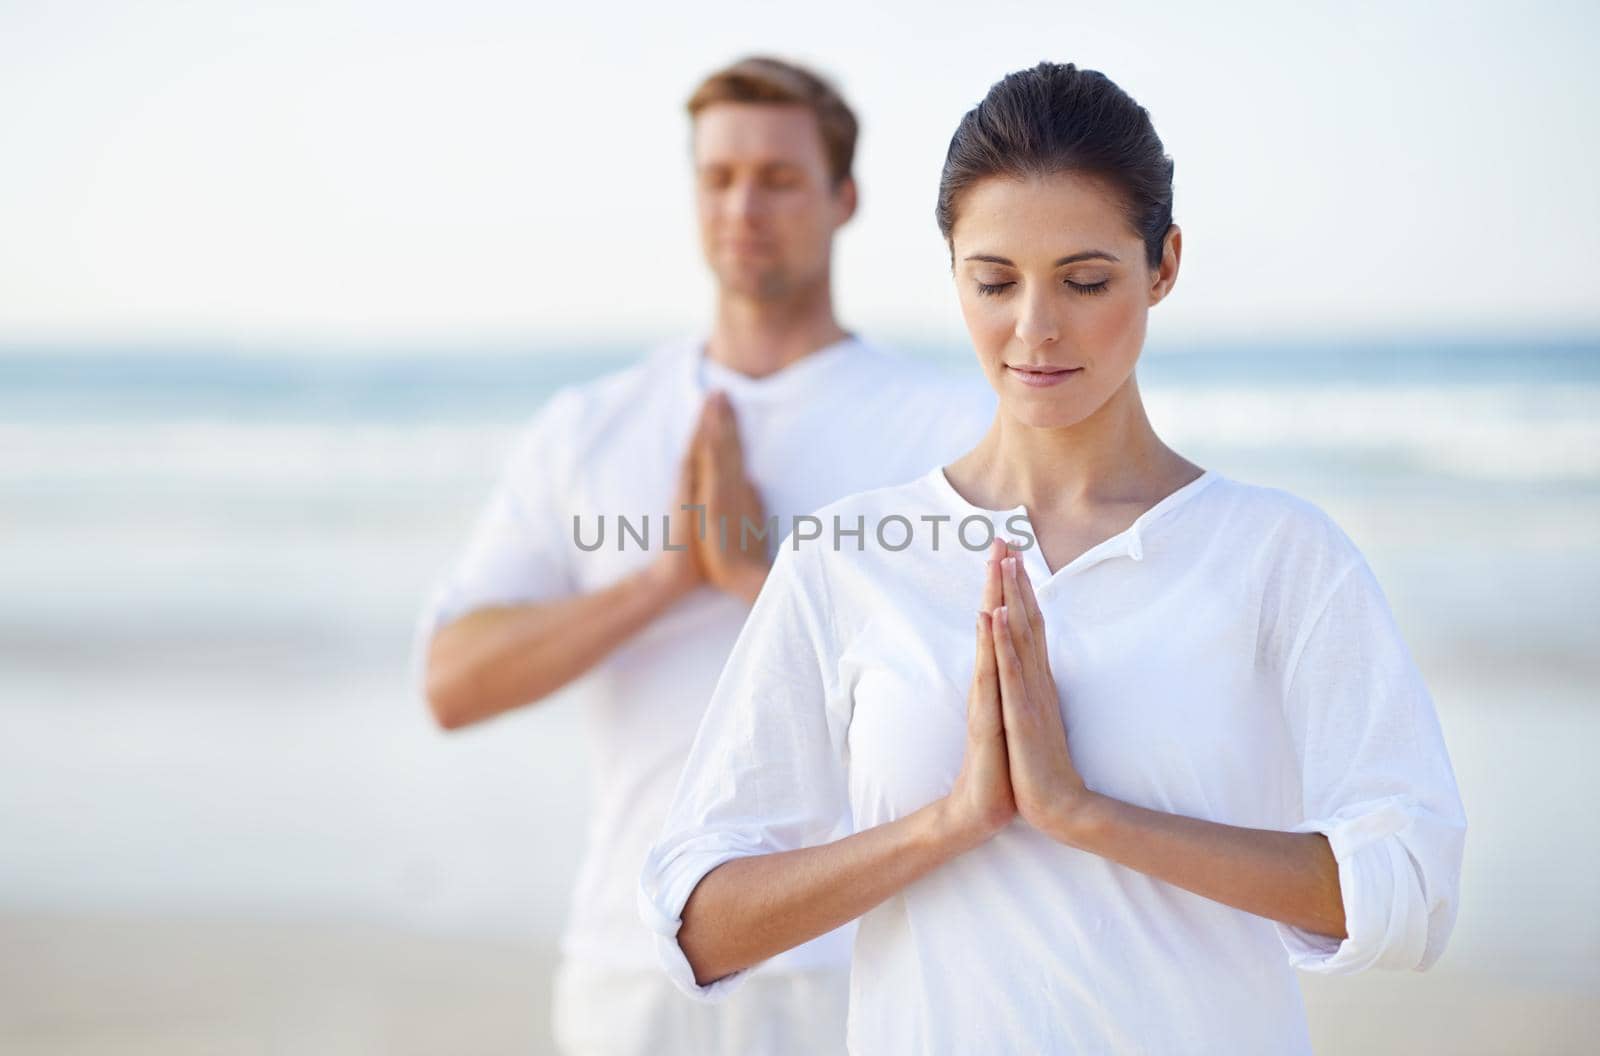 A young couple practising yoga on the beach.